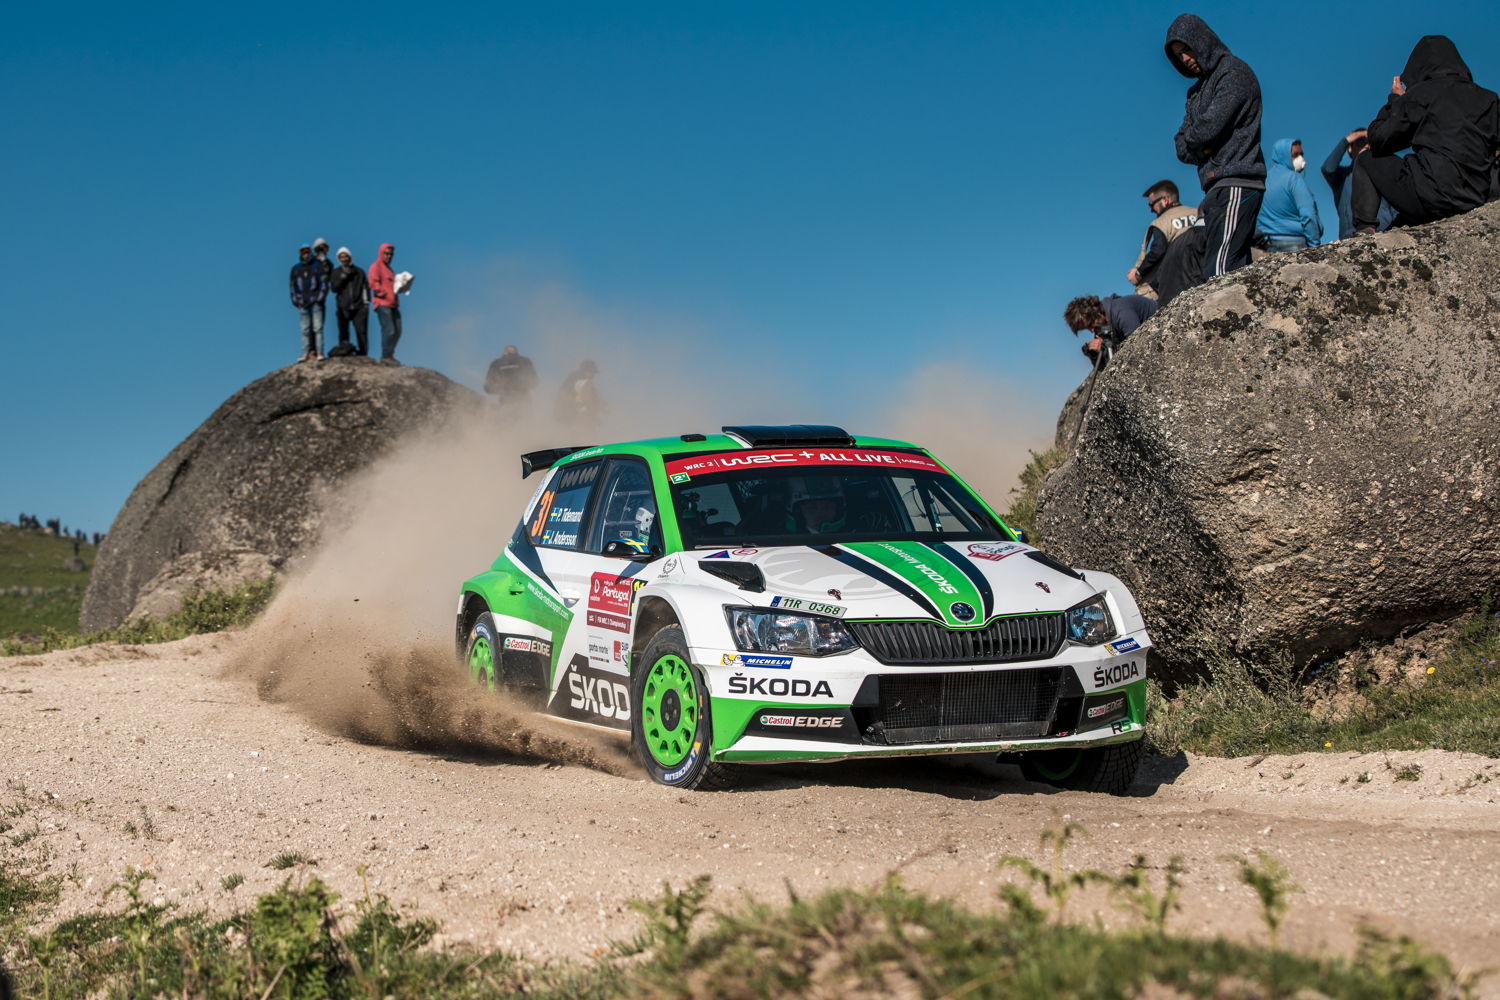 Reigning WRC 2 Champions Pontus Tidemand/Jonas
Andersson (ŠKODA FABIA R5) want to strengthen their
title defense with a top result at the upcoming Rally
Turkey Marmaris.